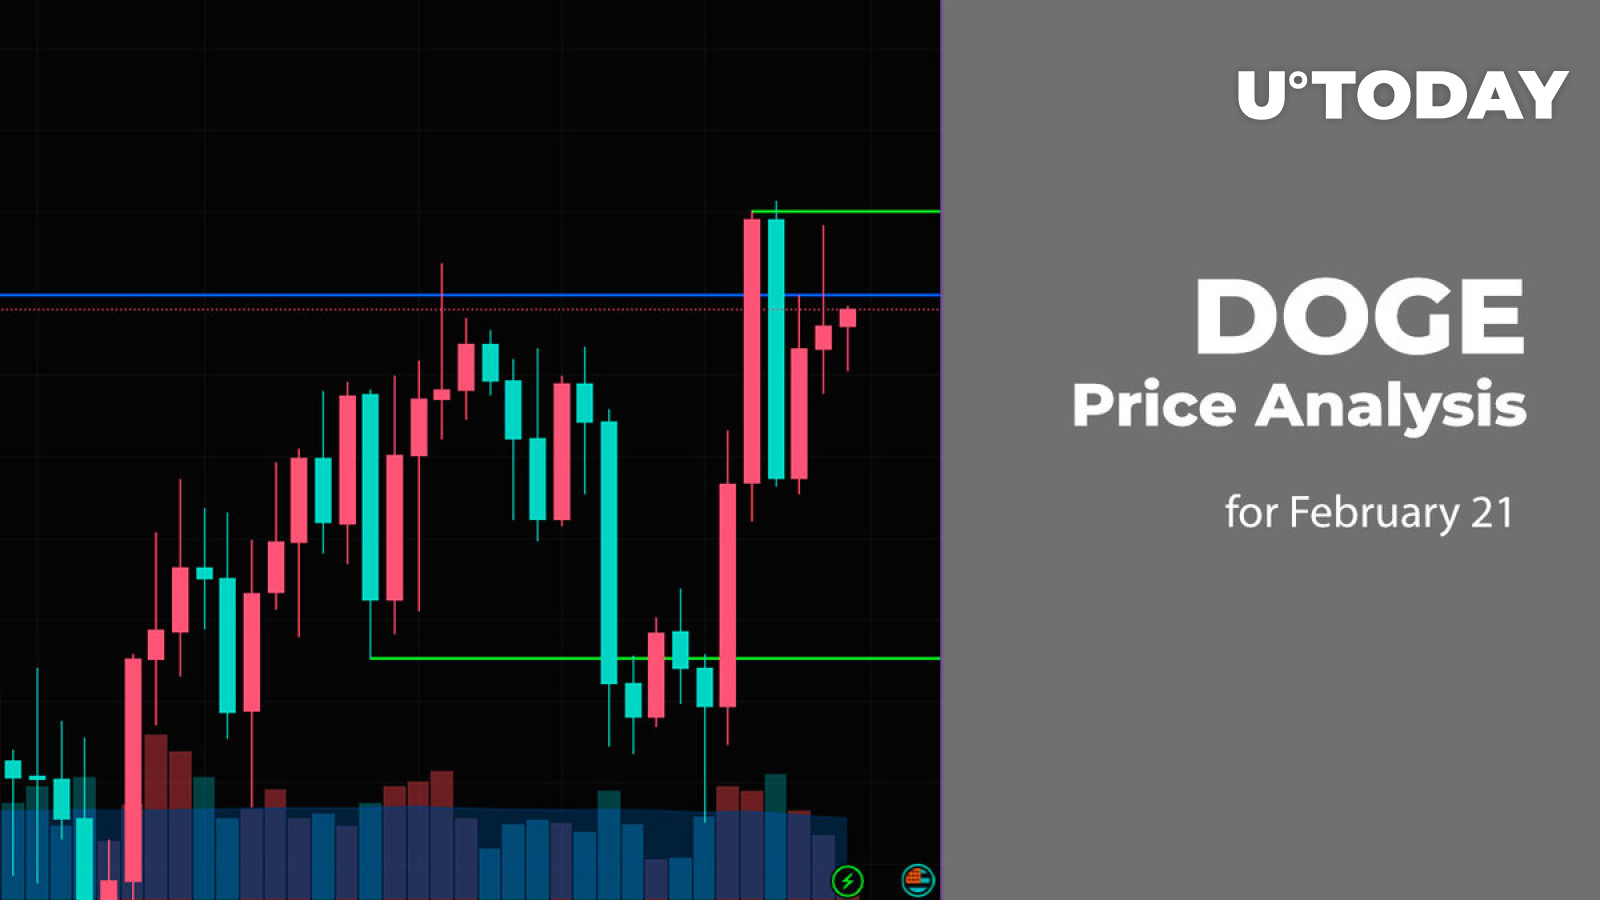 DOGE Price Analysis for February 21